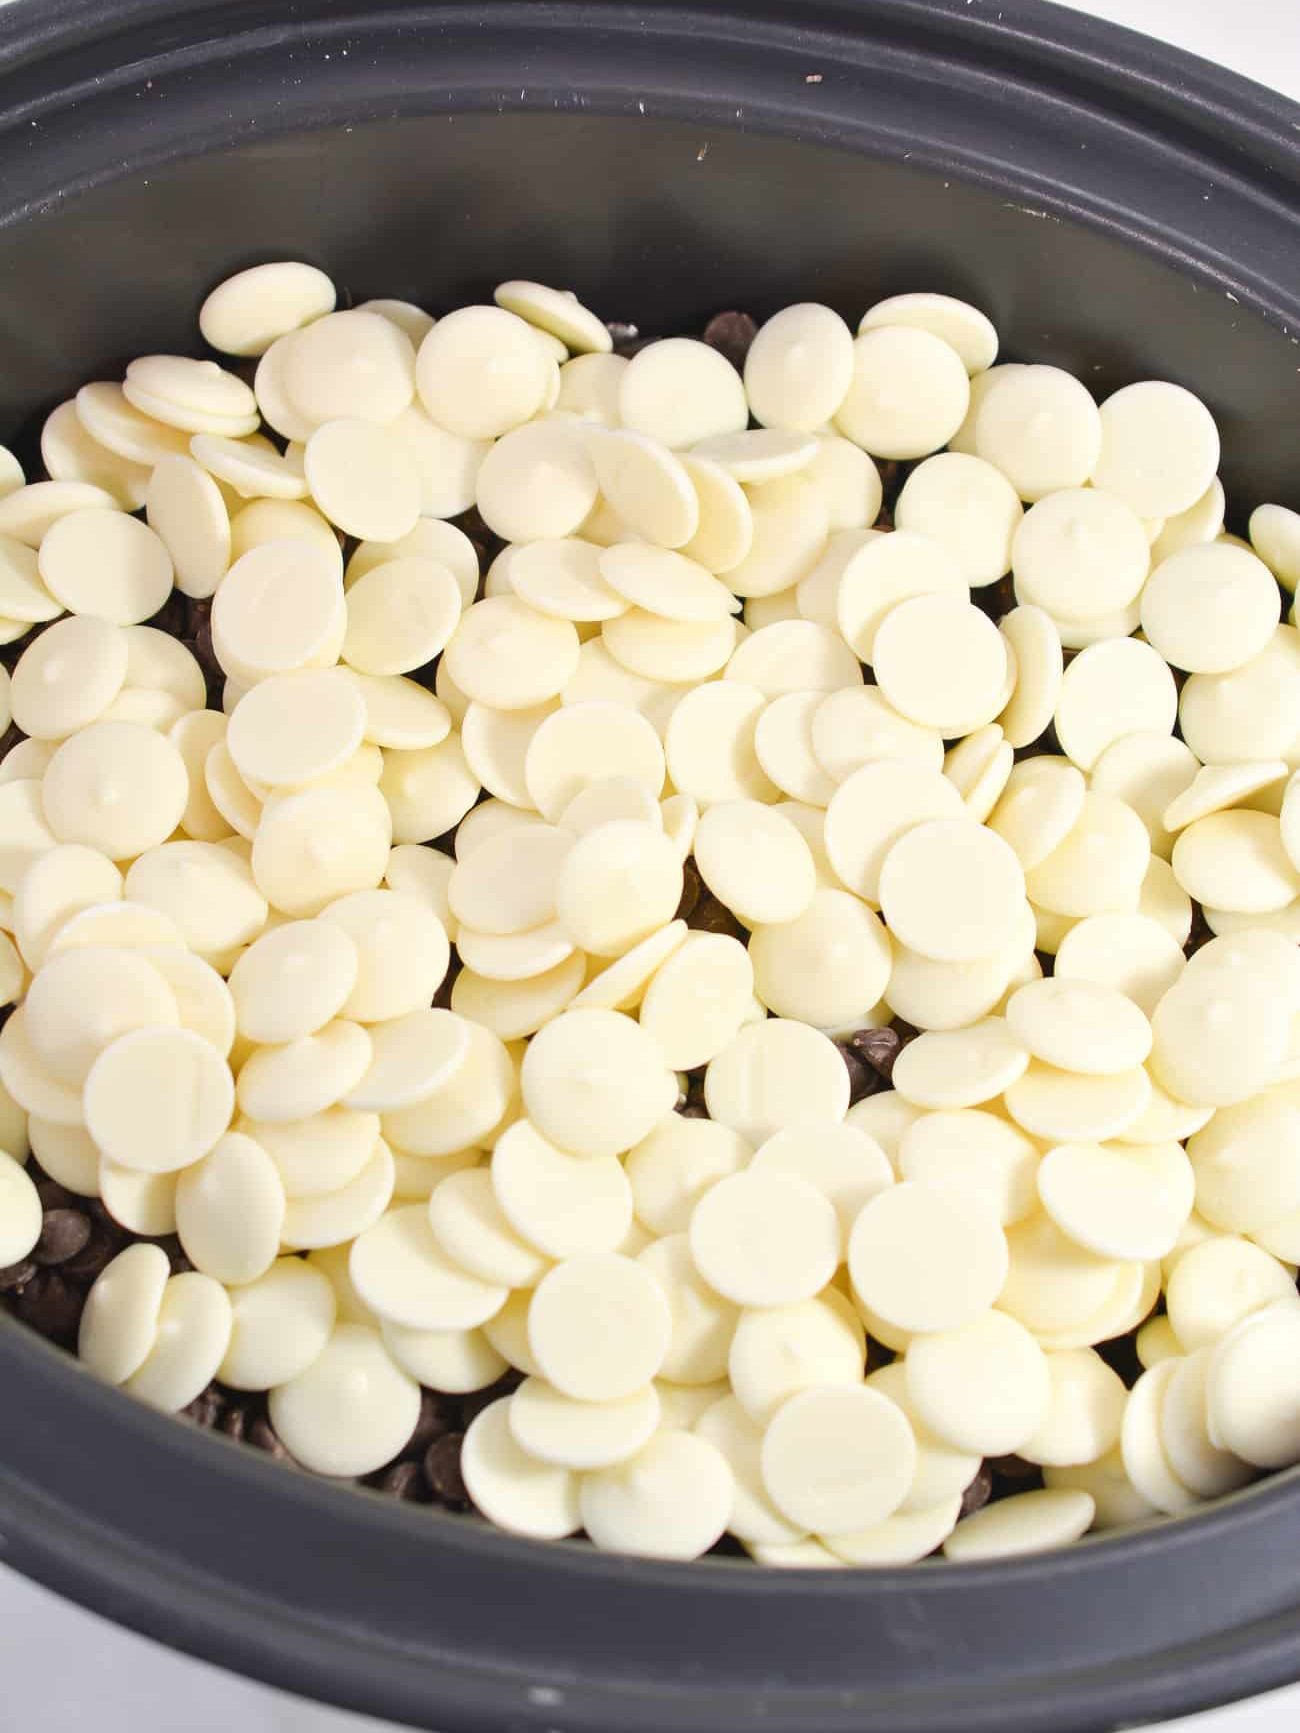 Layer the white chocolate bark or wafers on the top.